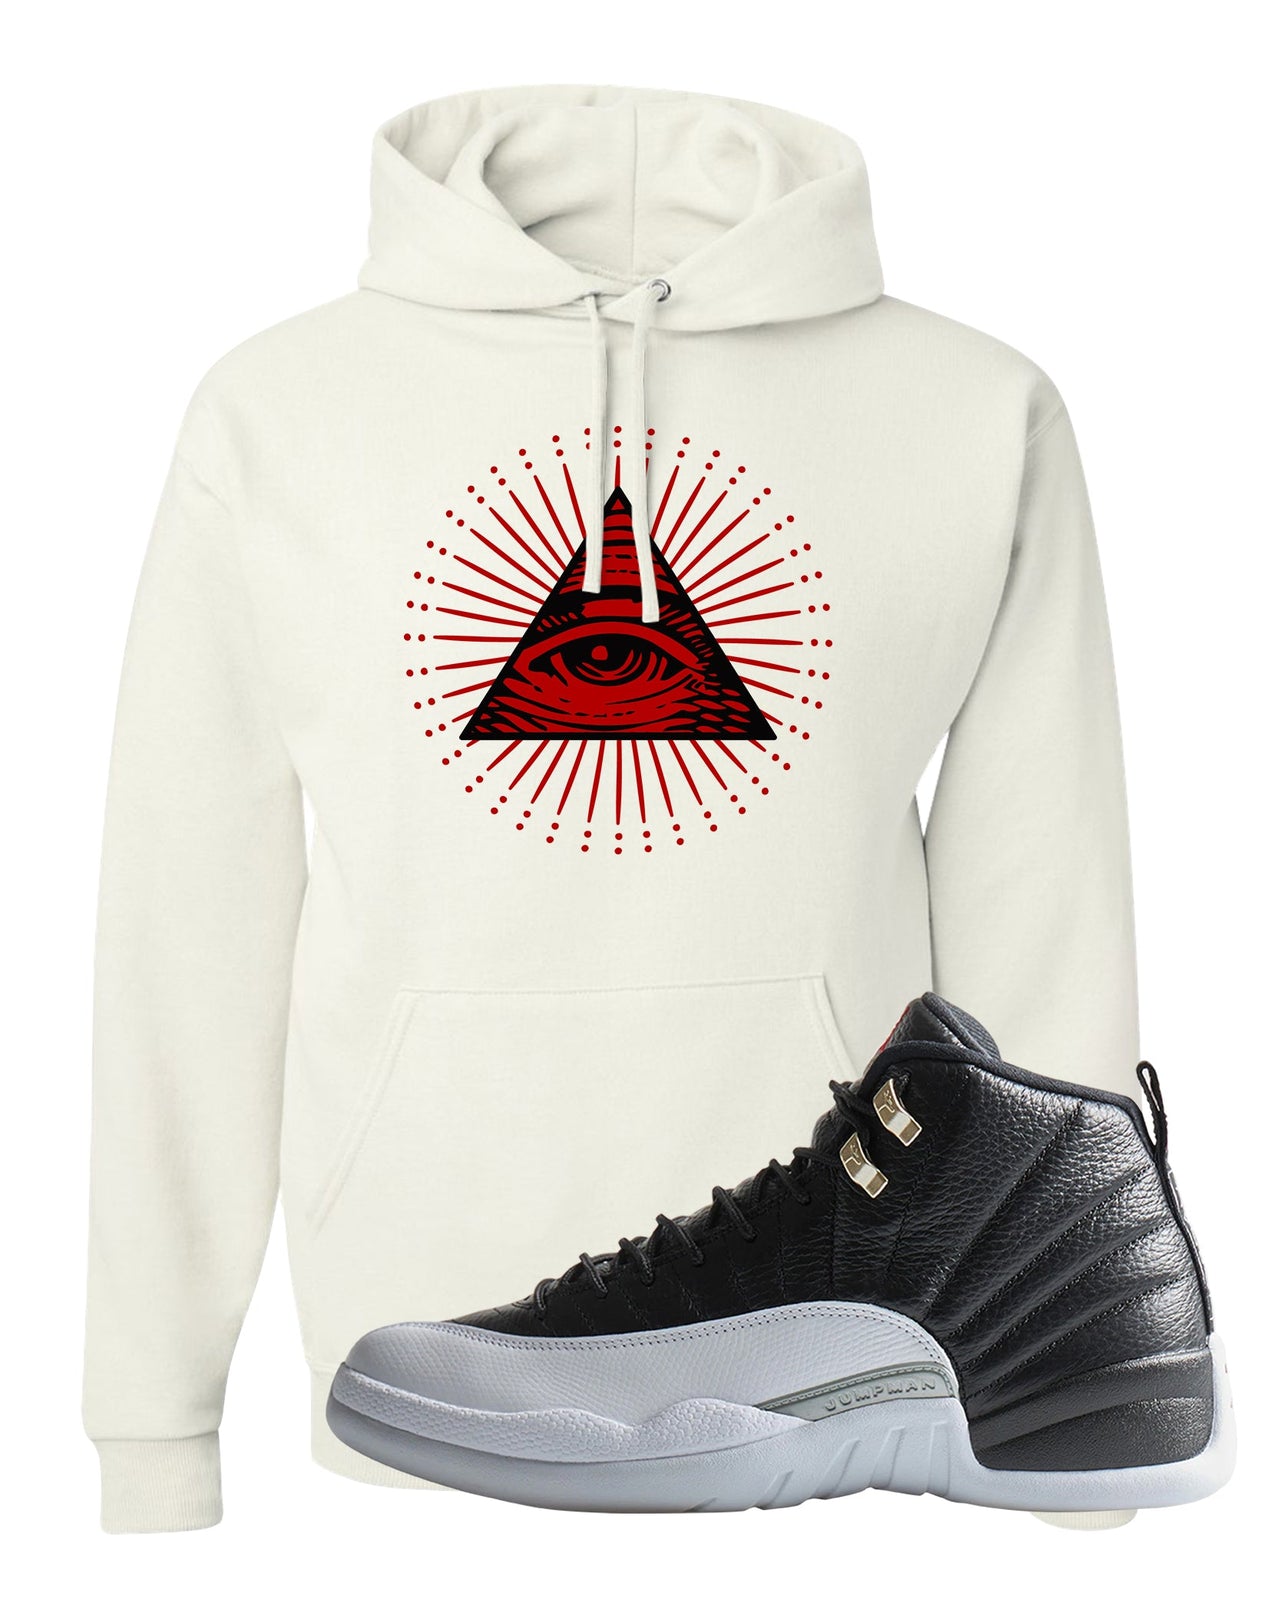 Playoff 12s Hoodie | All Seeing Eye, White